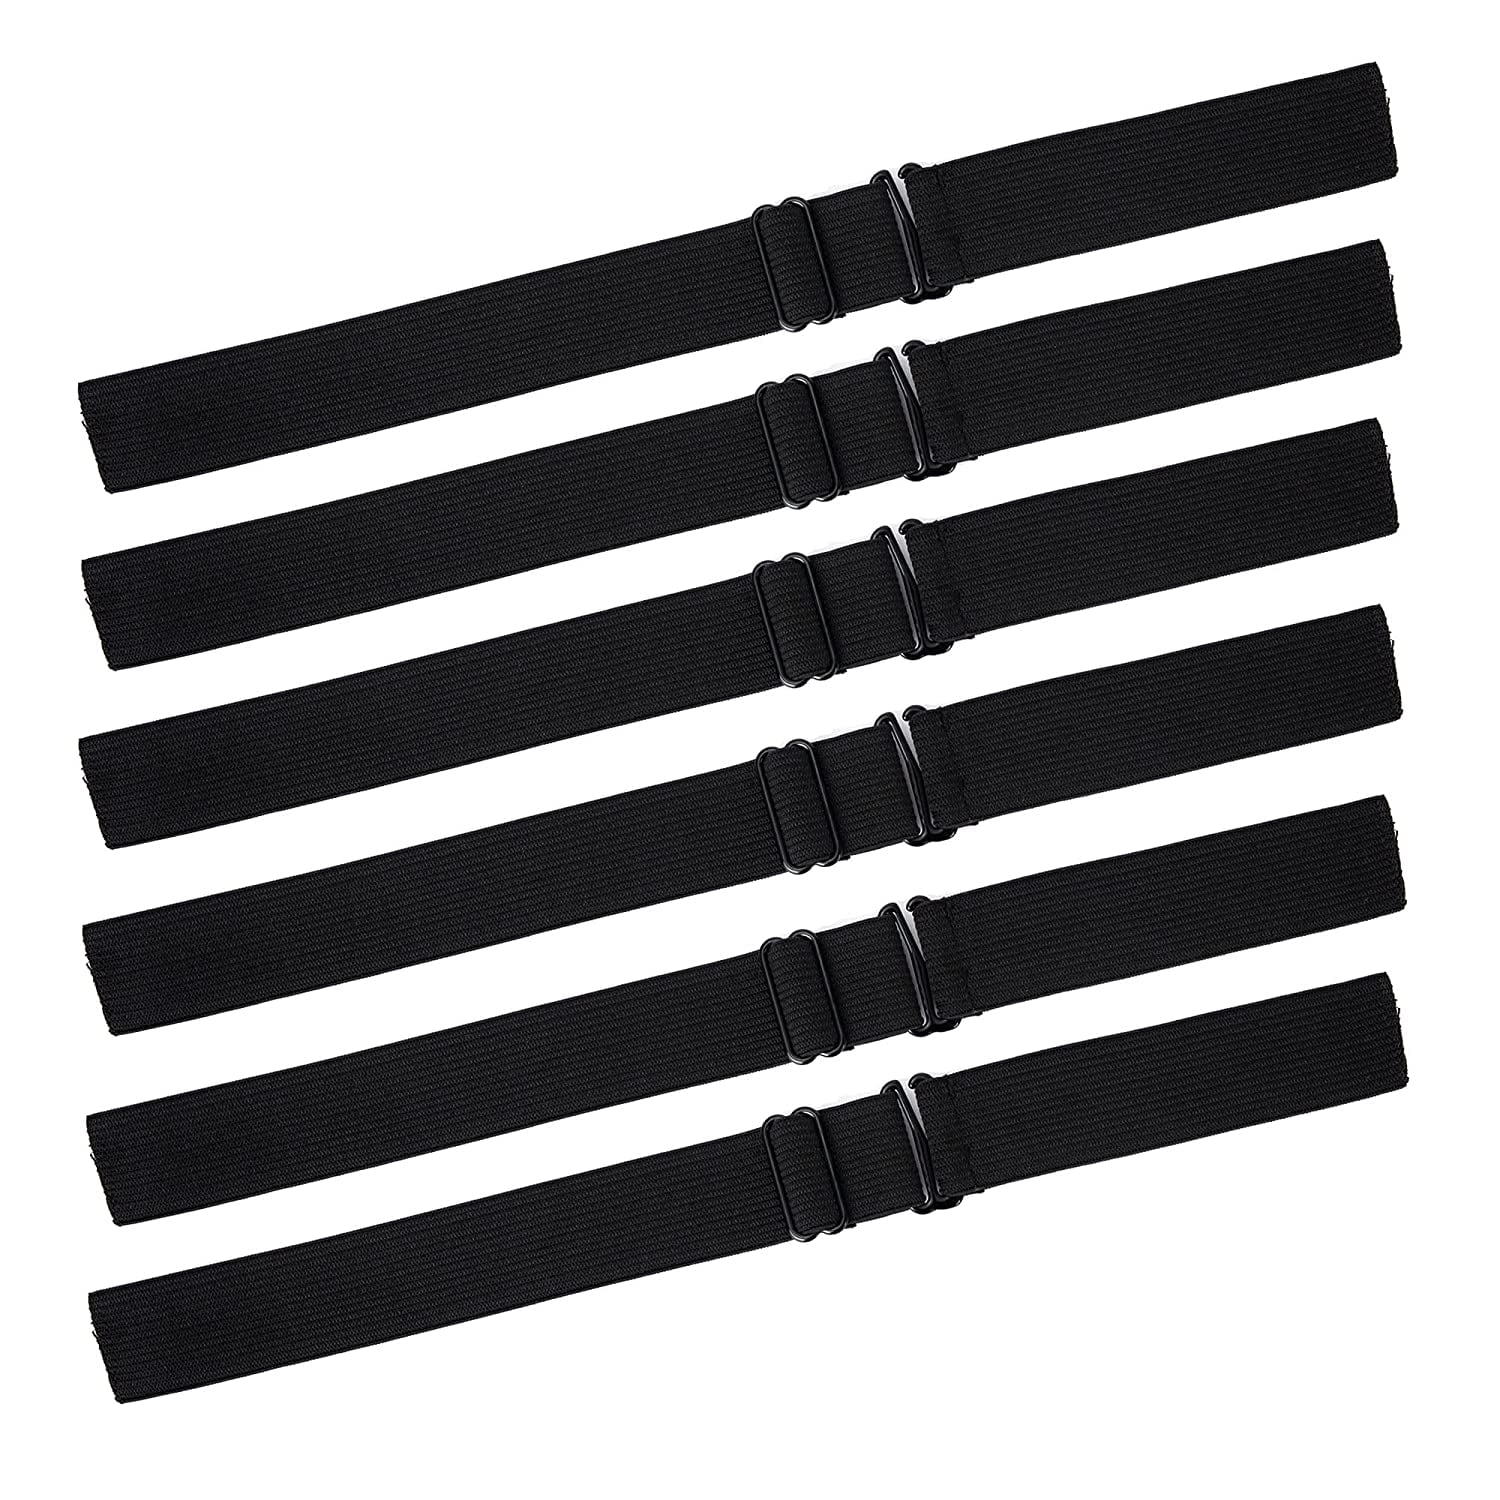  Leeven 5 Pcs Adjustable Elastic Band for Wigs With Hooks Black  Adjustable Straps Black Elastic Wig Band for Wigs/Lace Frontal/Lace  Closure/Bra Making DIY 1.1 Inch Width (28mm) : Arts, Crafts 